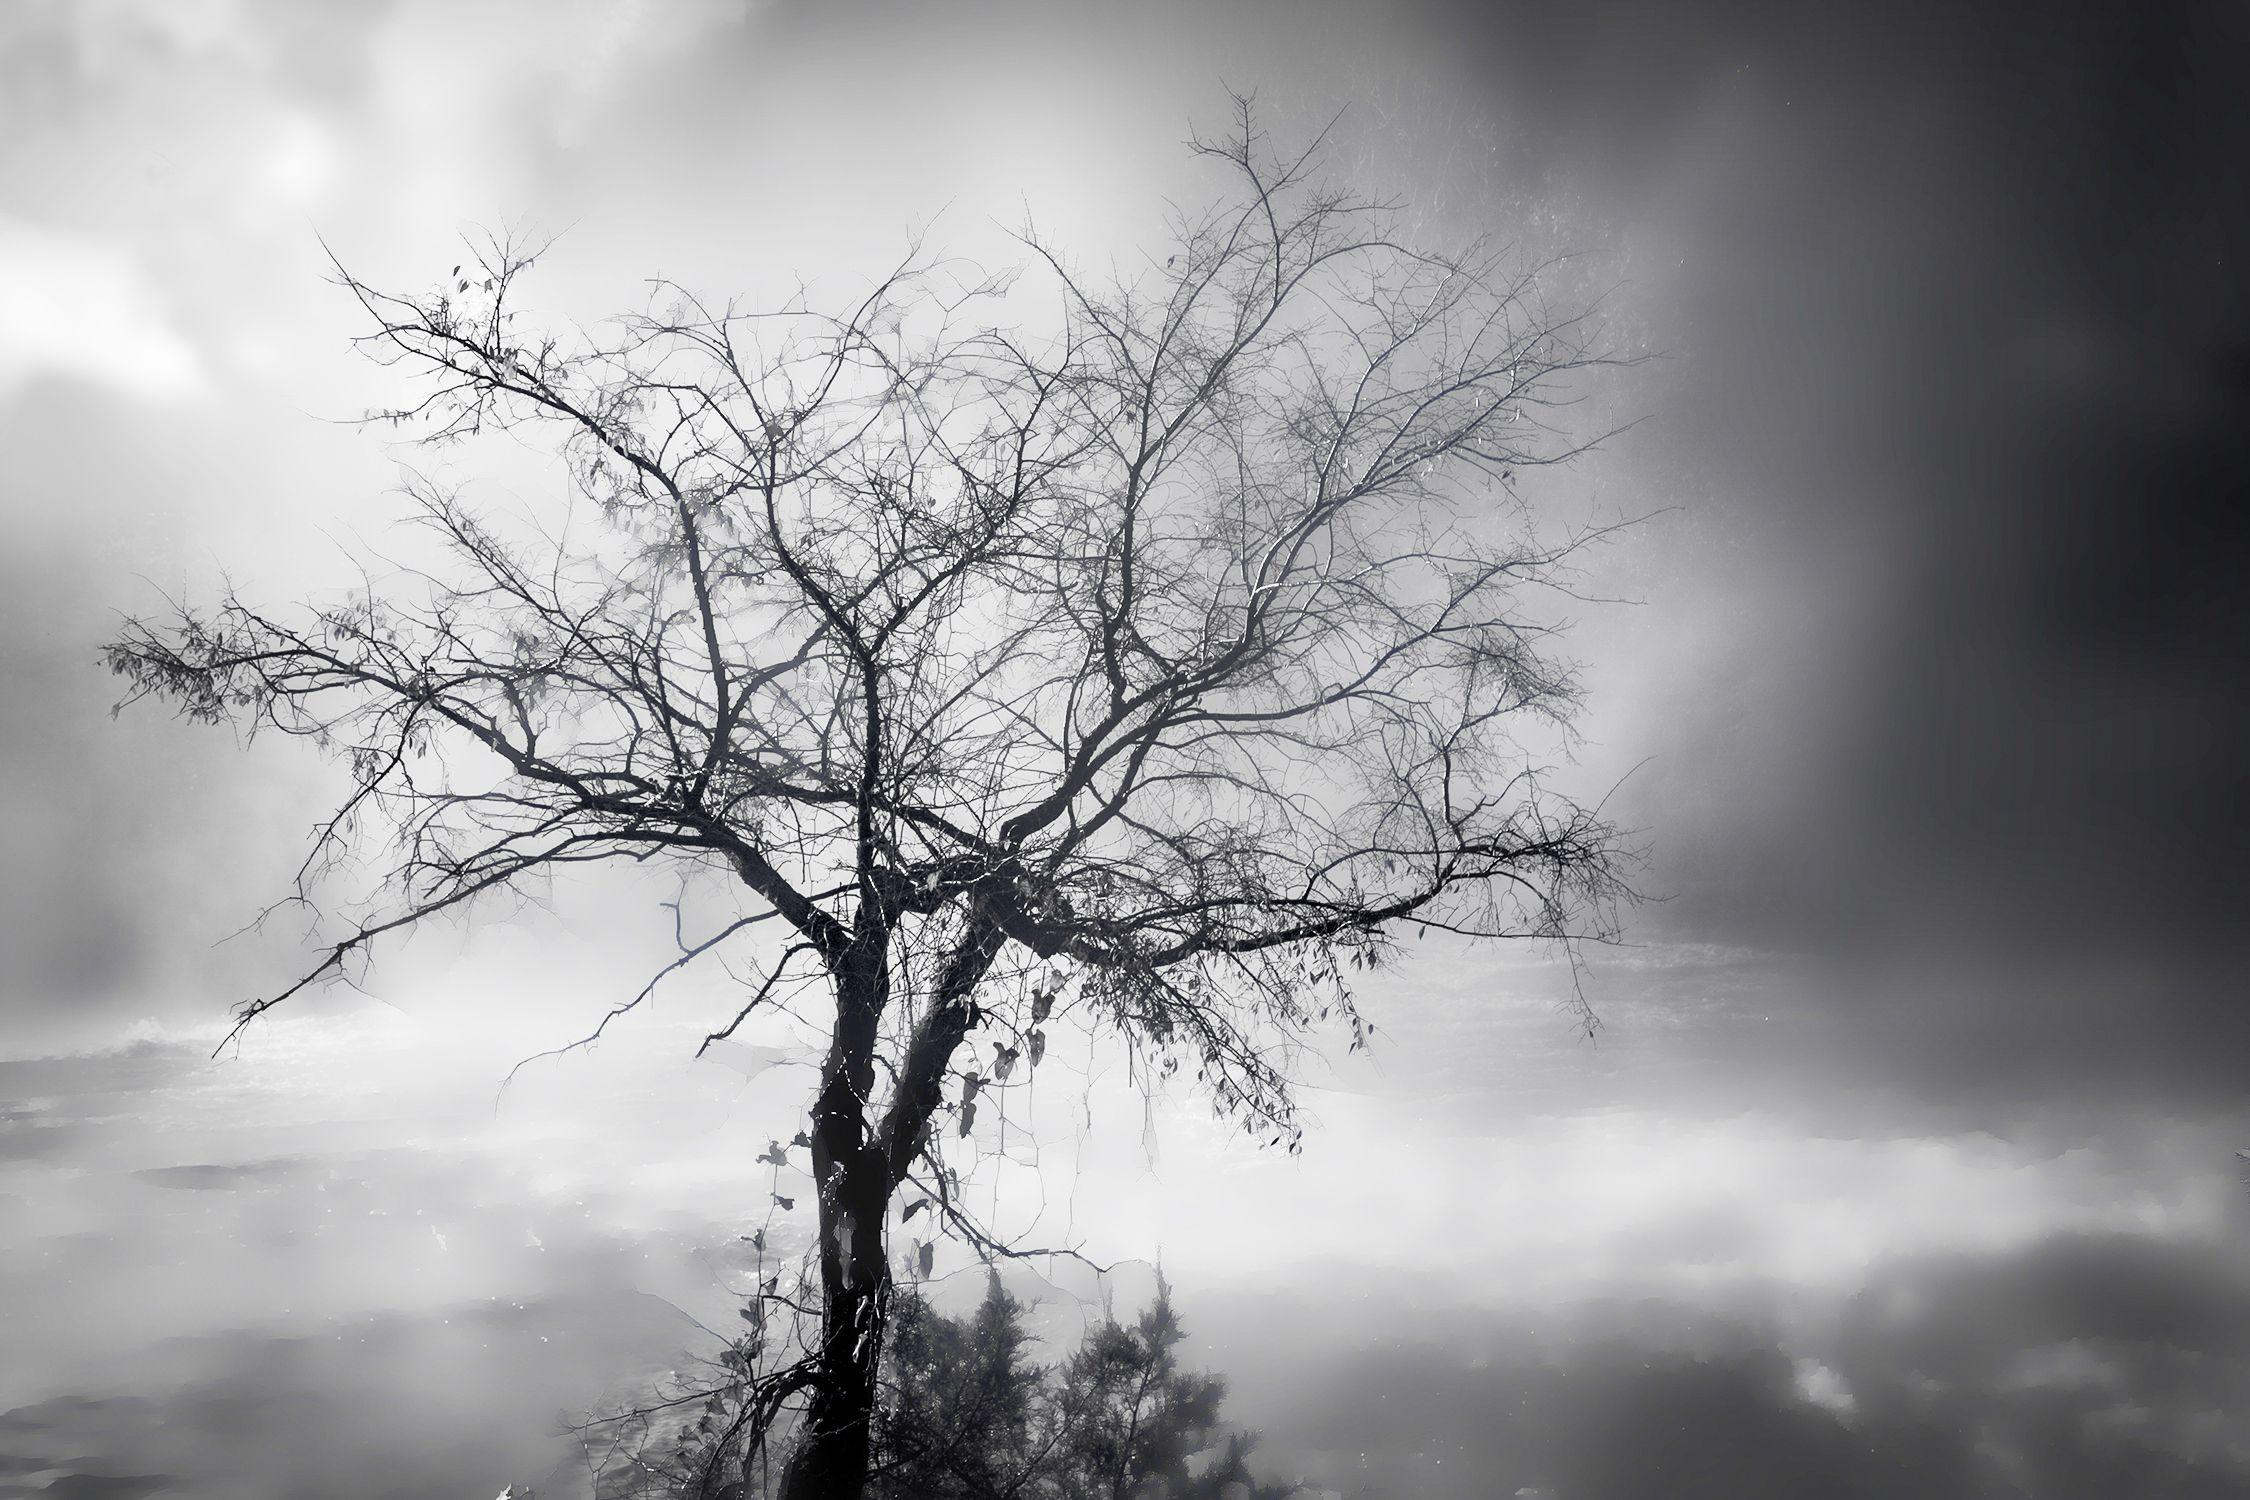 Alicia Pastiran Black and White Photograph - Solitary Tree in the Mist, Photograph, Archival Ink Jet